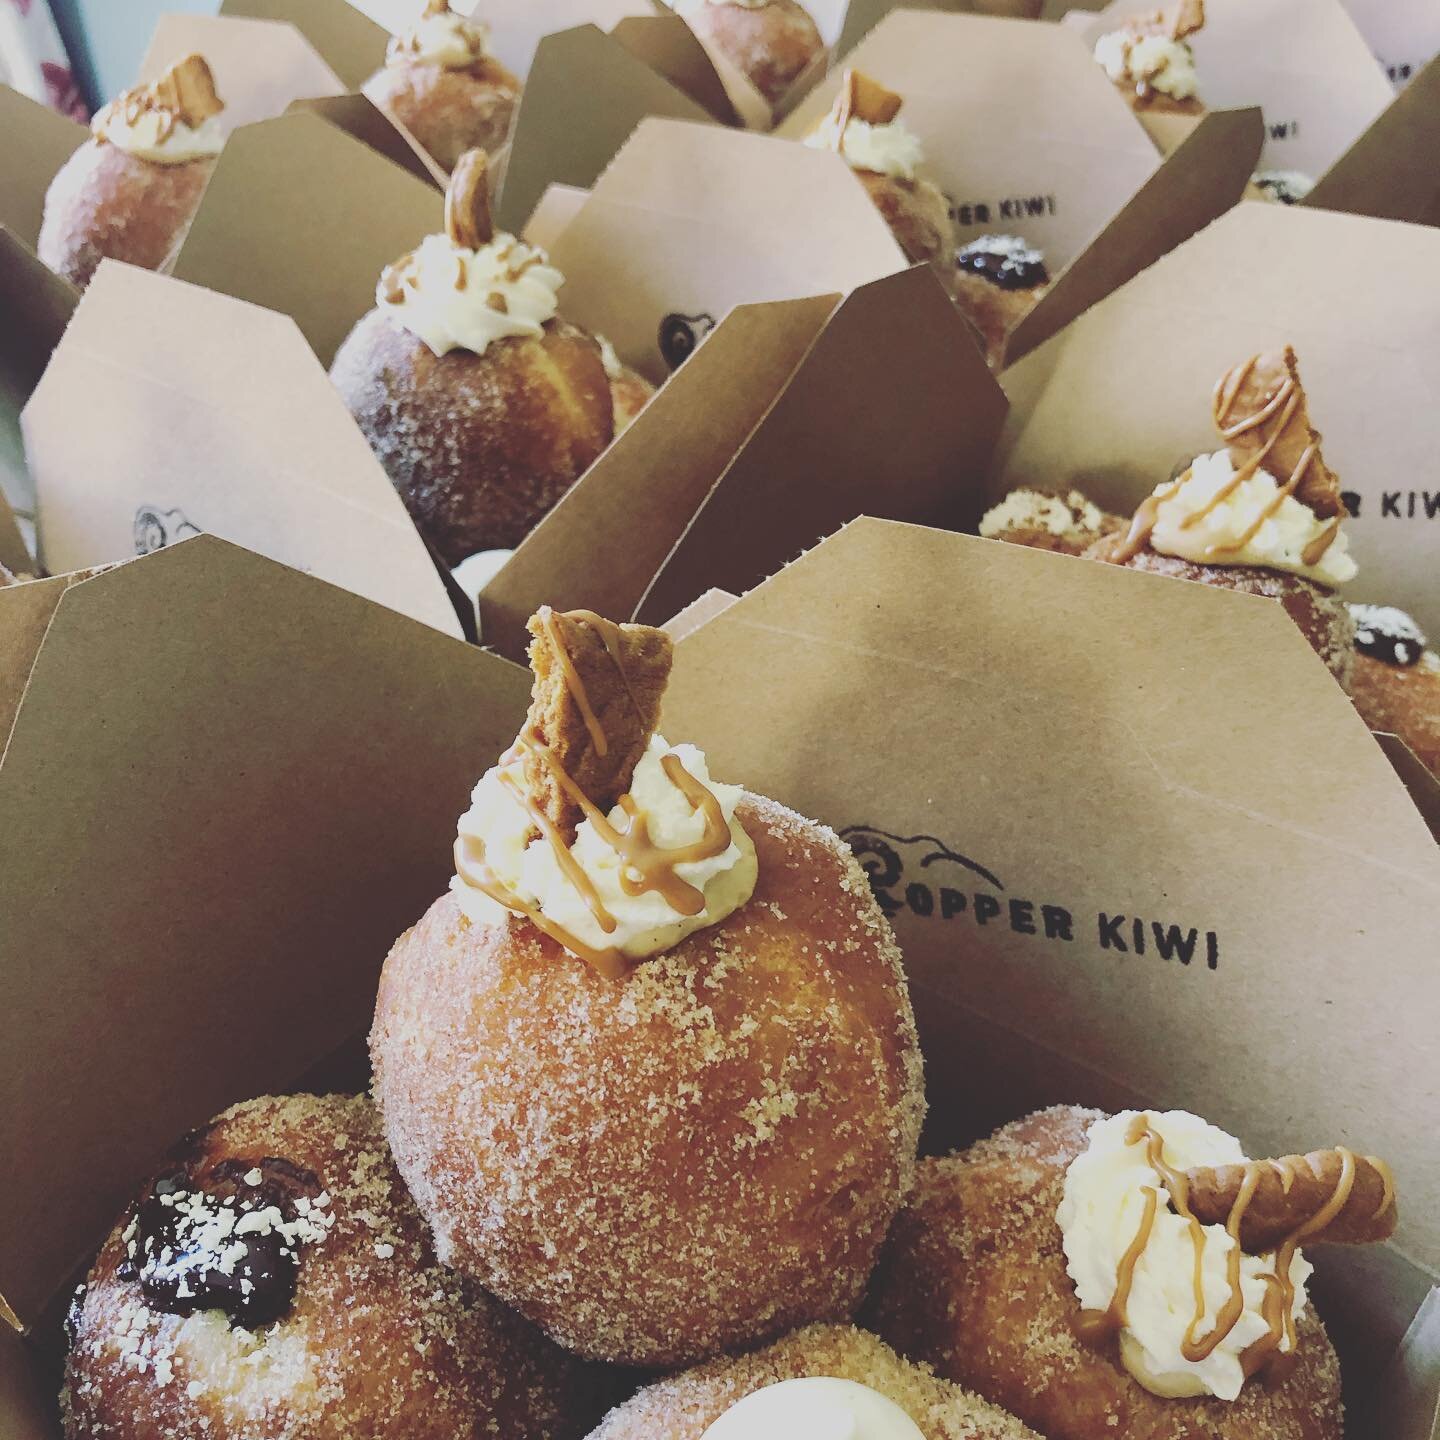 🍩🍩🍩 Keeping us busy while we can&rsquo;t be out and about!! Homemade doughnuts are flying out of the kitchen here! Get in touch to be added to the HUGE list of deliveries over the next few days! New flavours each week! Thanks for supporting us guy